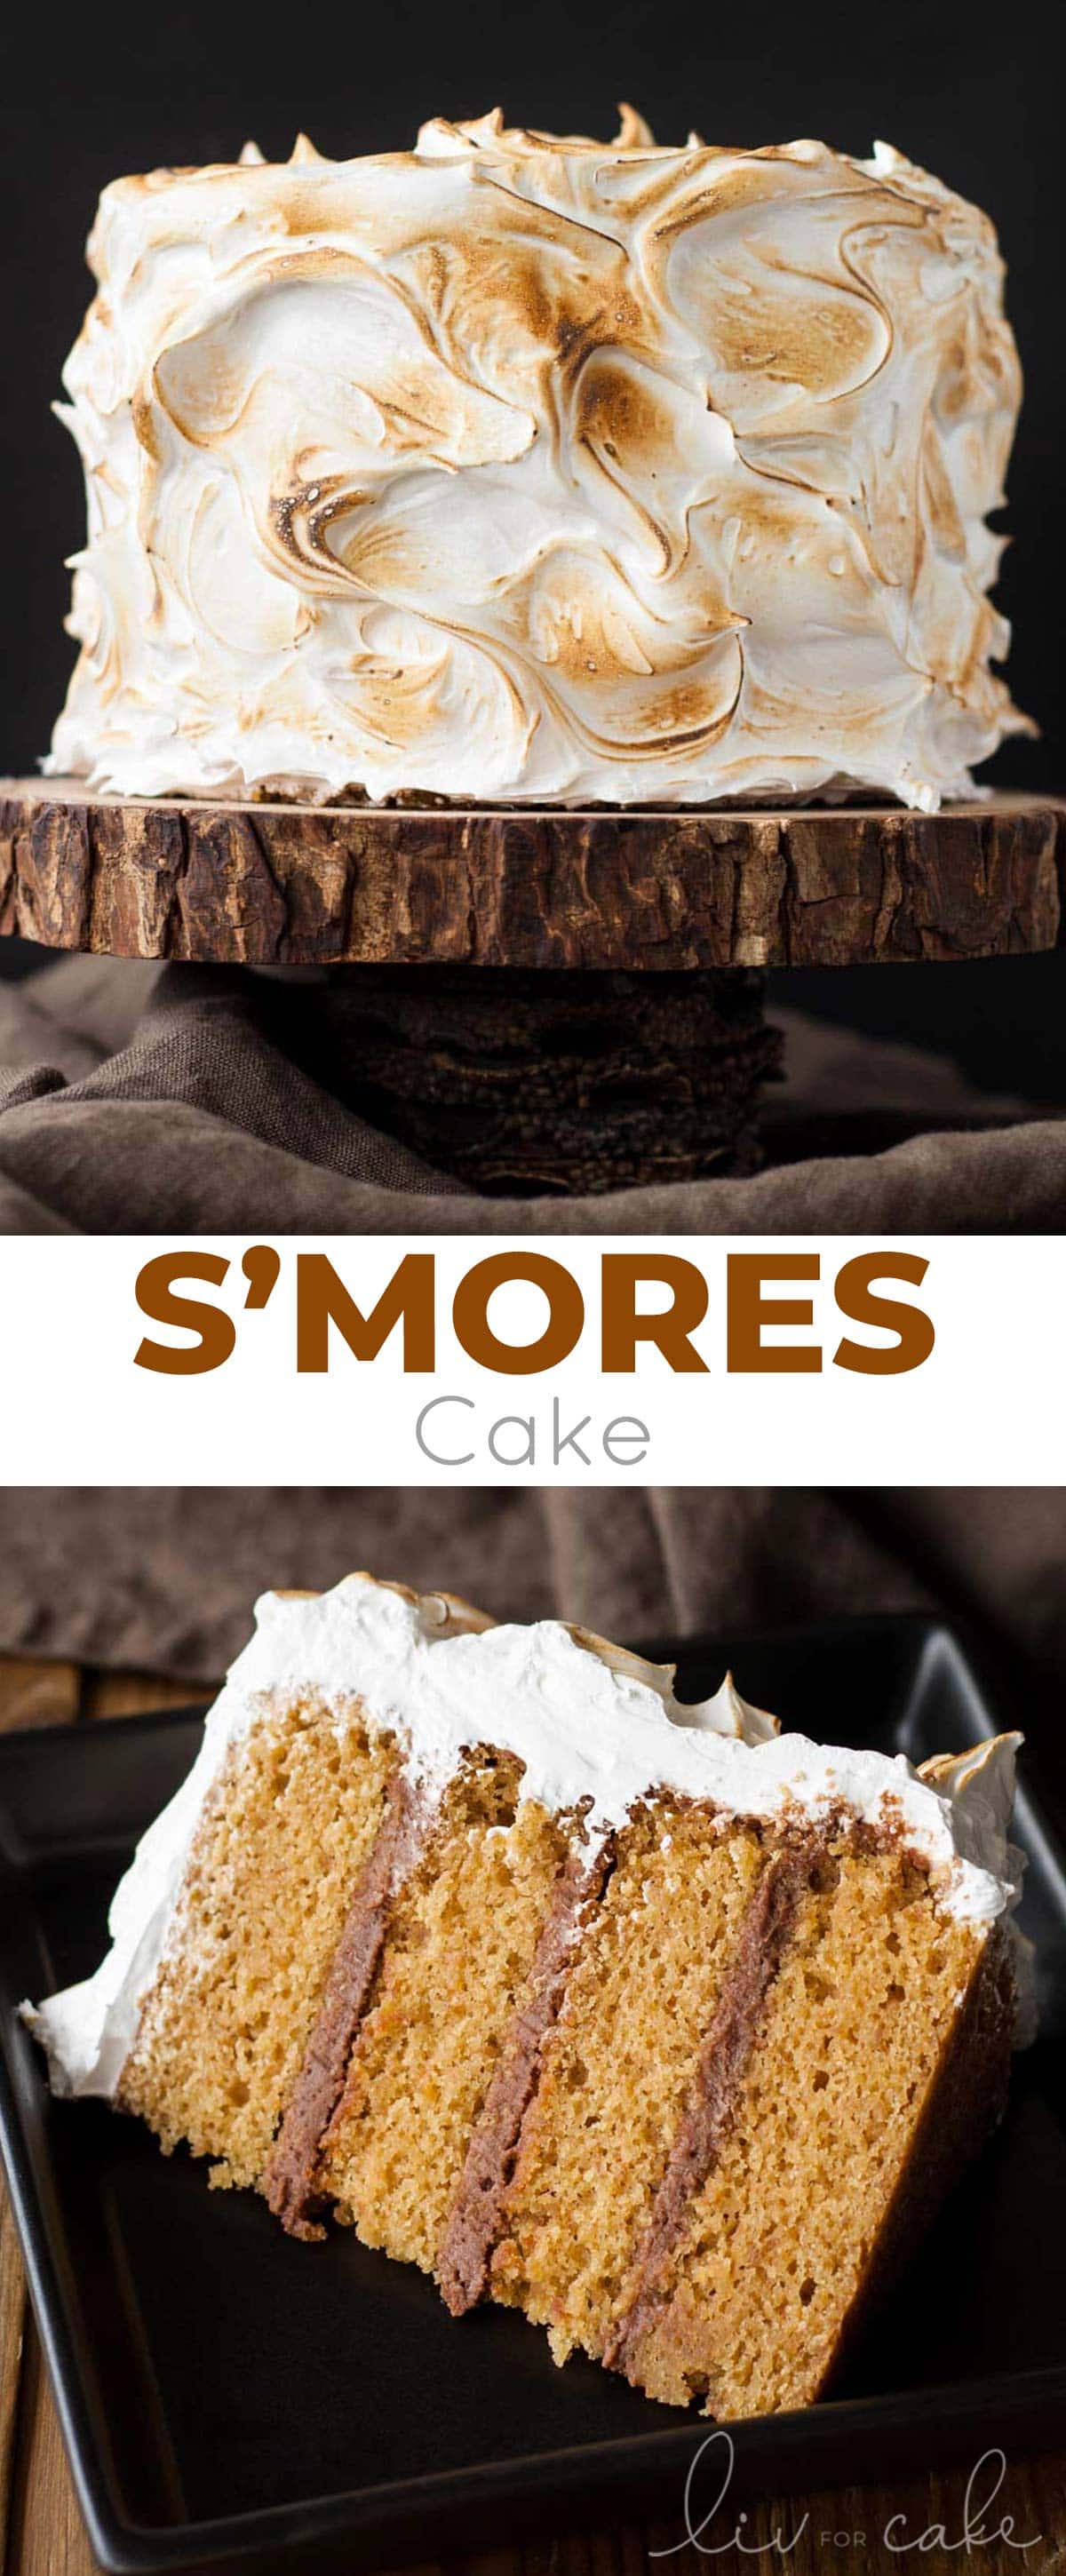 S'mores cake photo collage